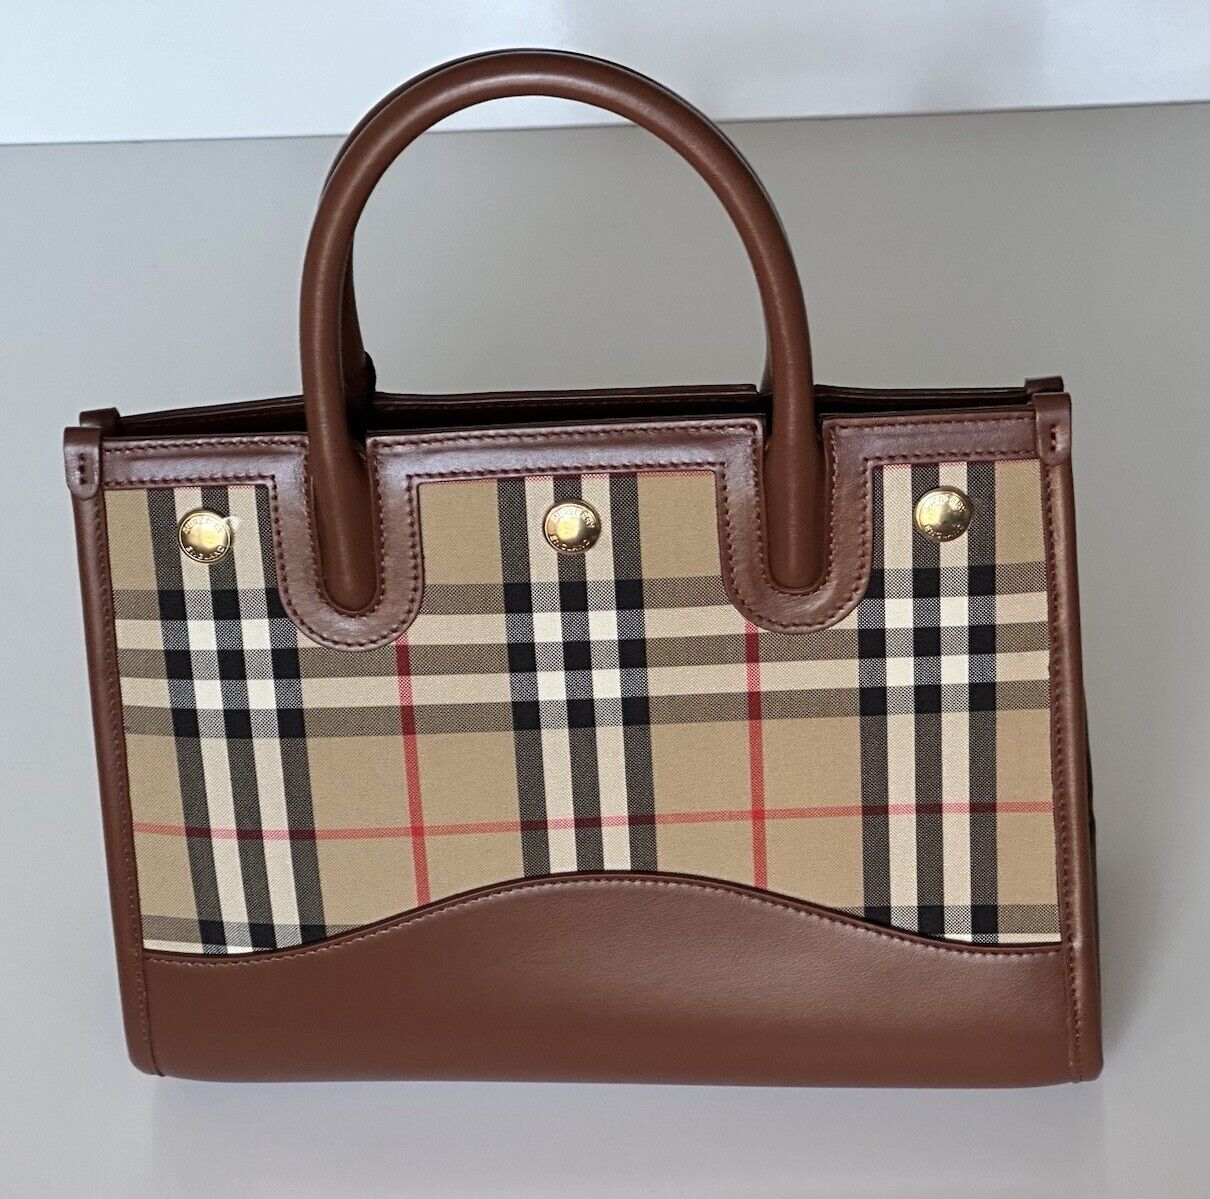 NWT $1560 Burberry Vintage Check Title Small Leather Cross Body Bag Tan 80754241